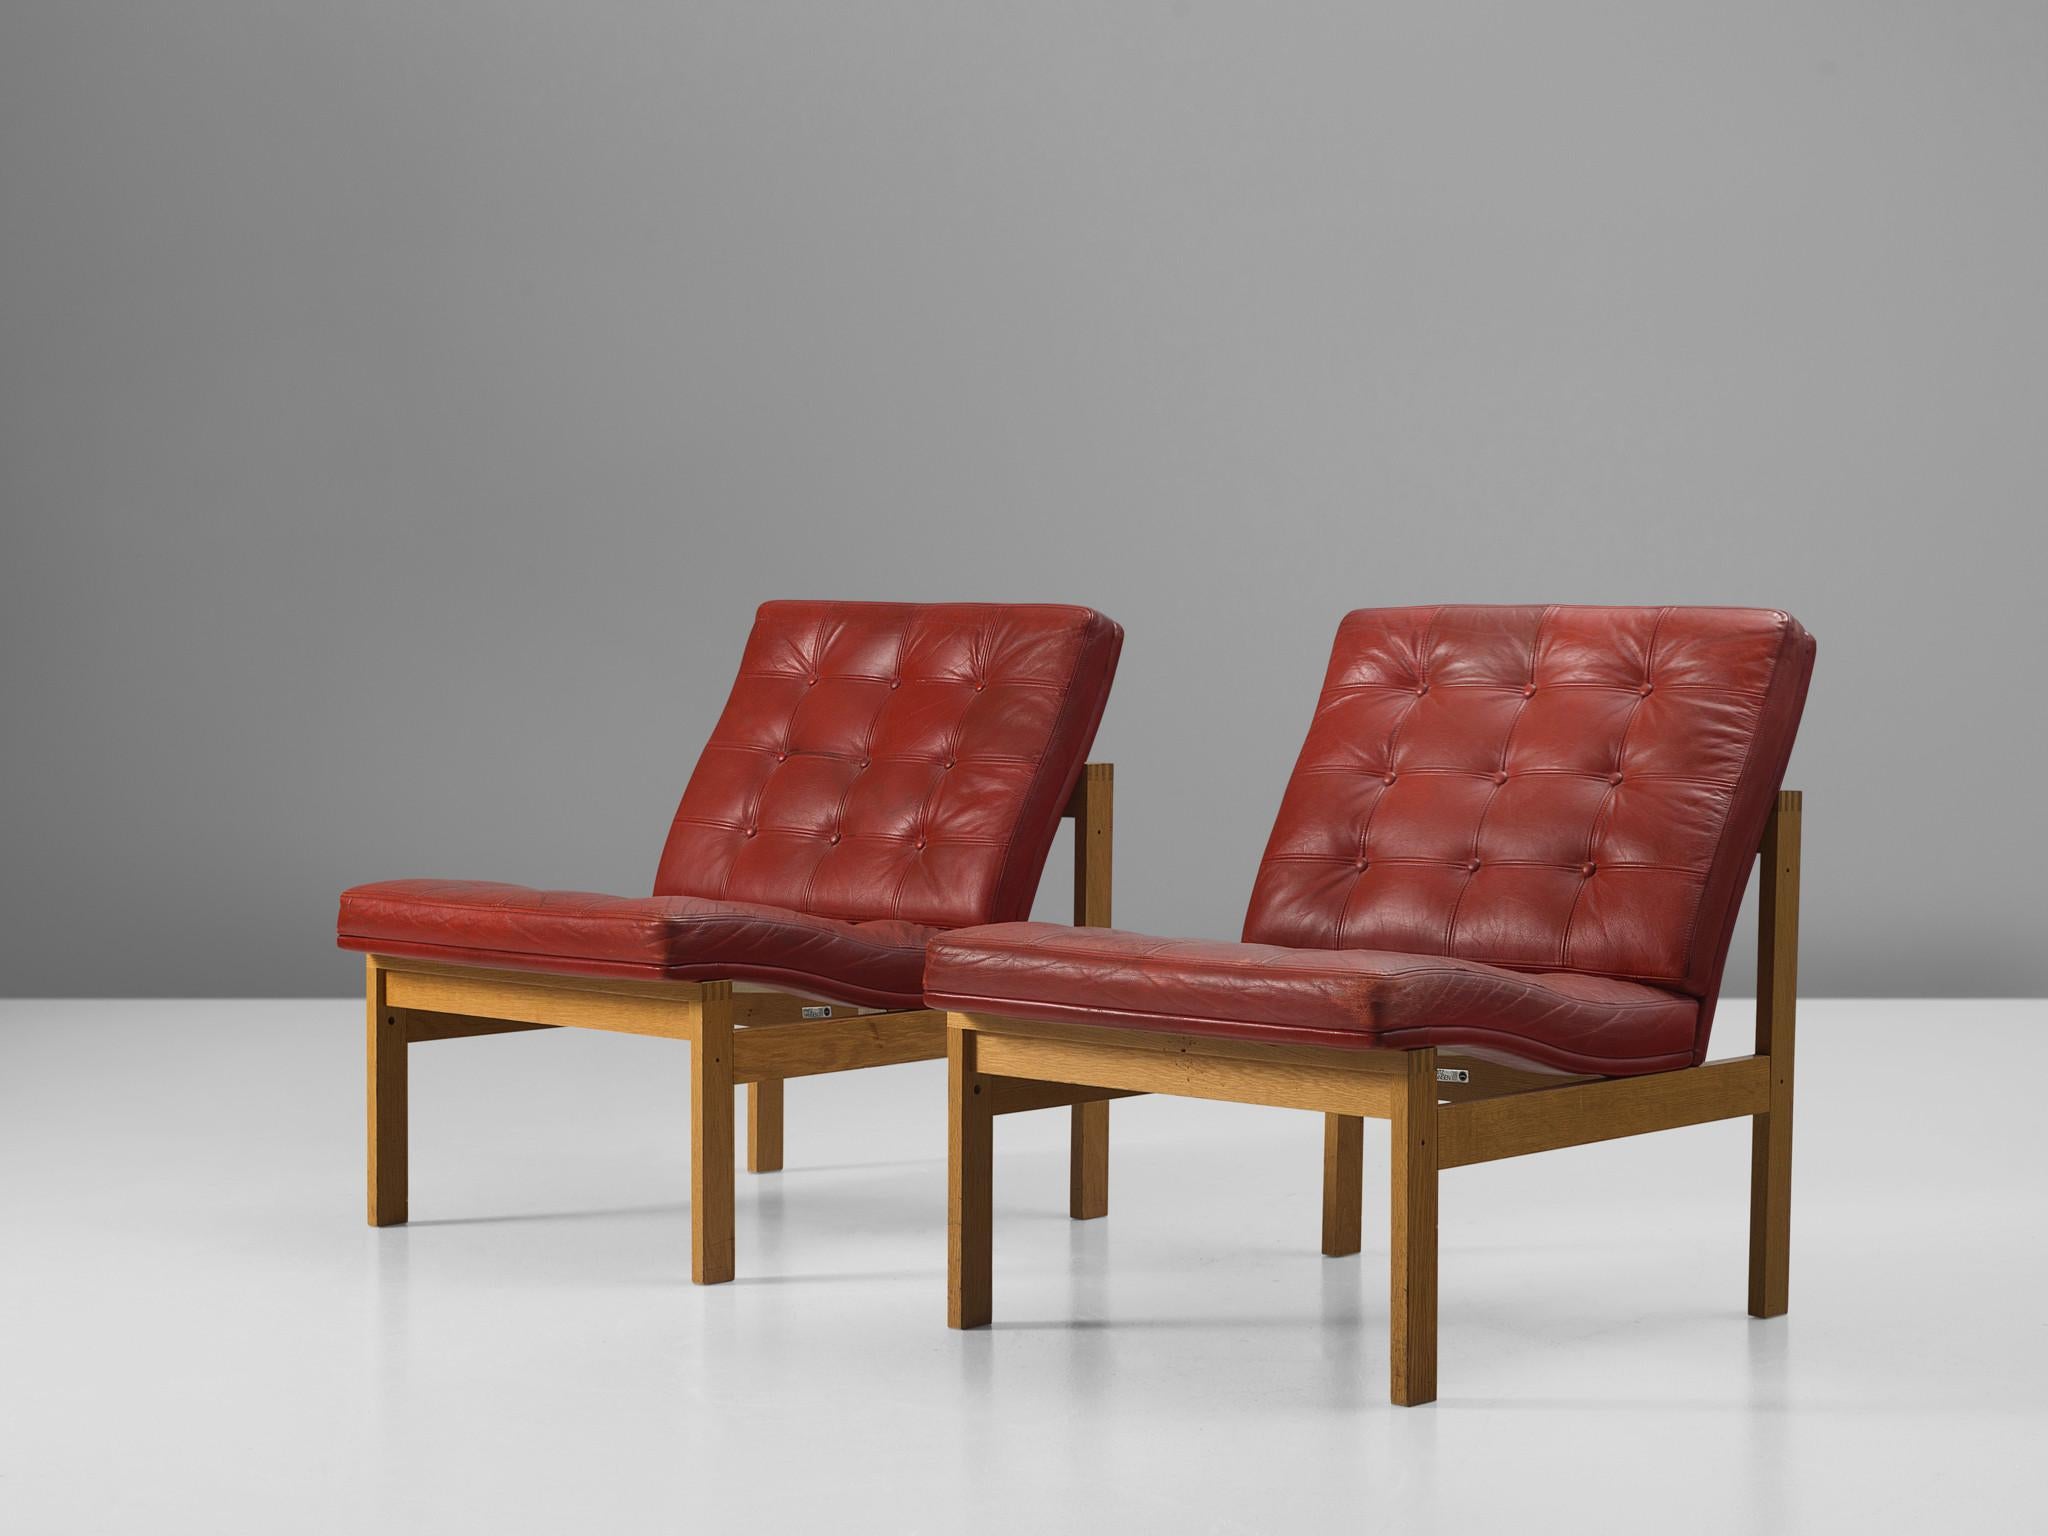 Ole Gjerløv-Knudsen & Torben Lind for Fritz Hansen, easy chair, in oak and deep red leather, Denmark, 1962.

Modern and beautiful colored modular chairs. These chairs can also be turned into a sofa, resulting in a crisp yet warm design. The oak